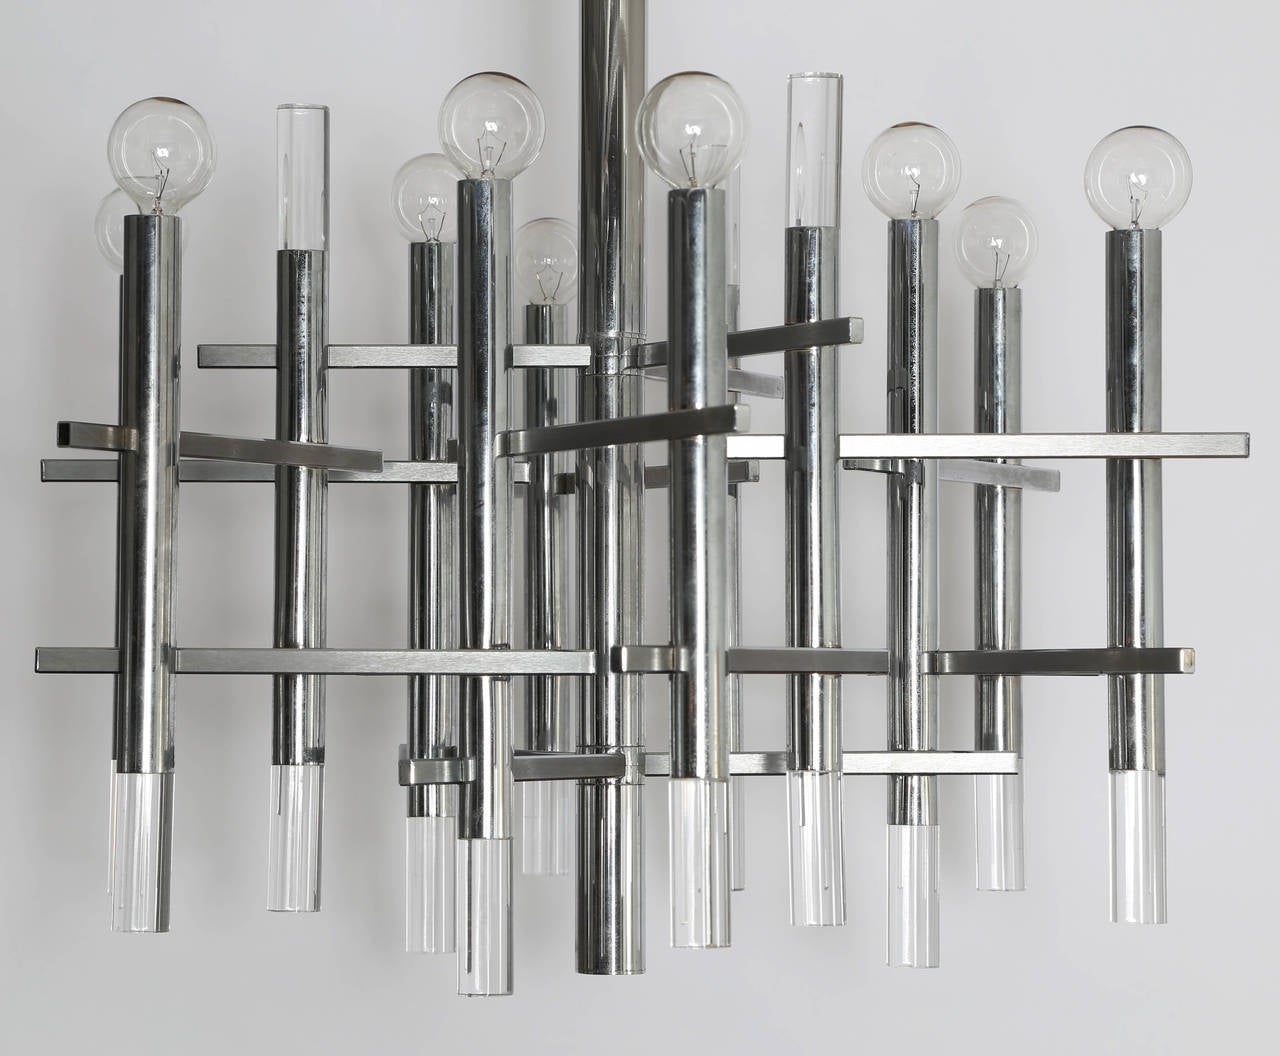 Lovely nine-light chandelier by Gaetano Sciolari features vertical tubes of polished chrome and Lucite connected with horizontal rectangles in brushed chrome. Sciolari label inside original ceiling canopy. Overall height, including chain and